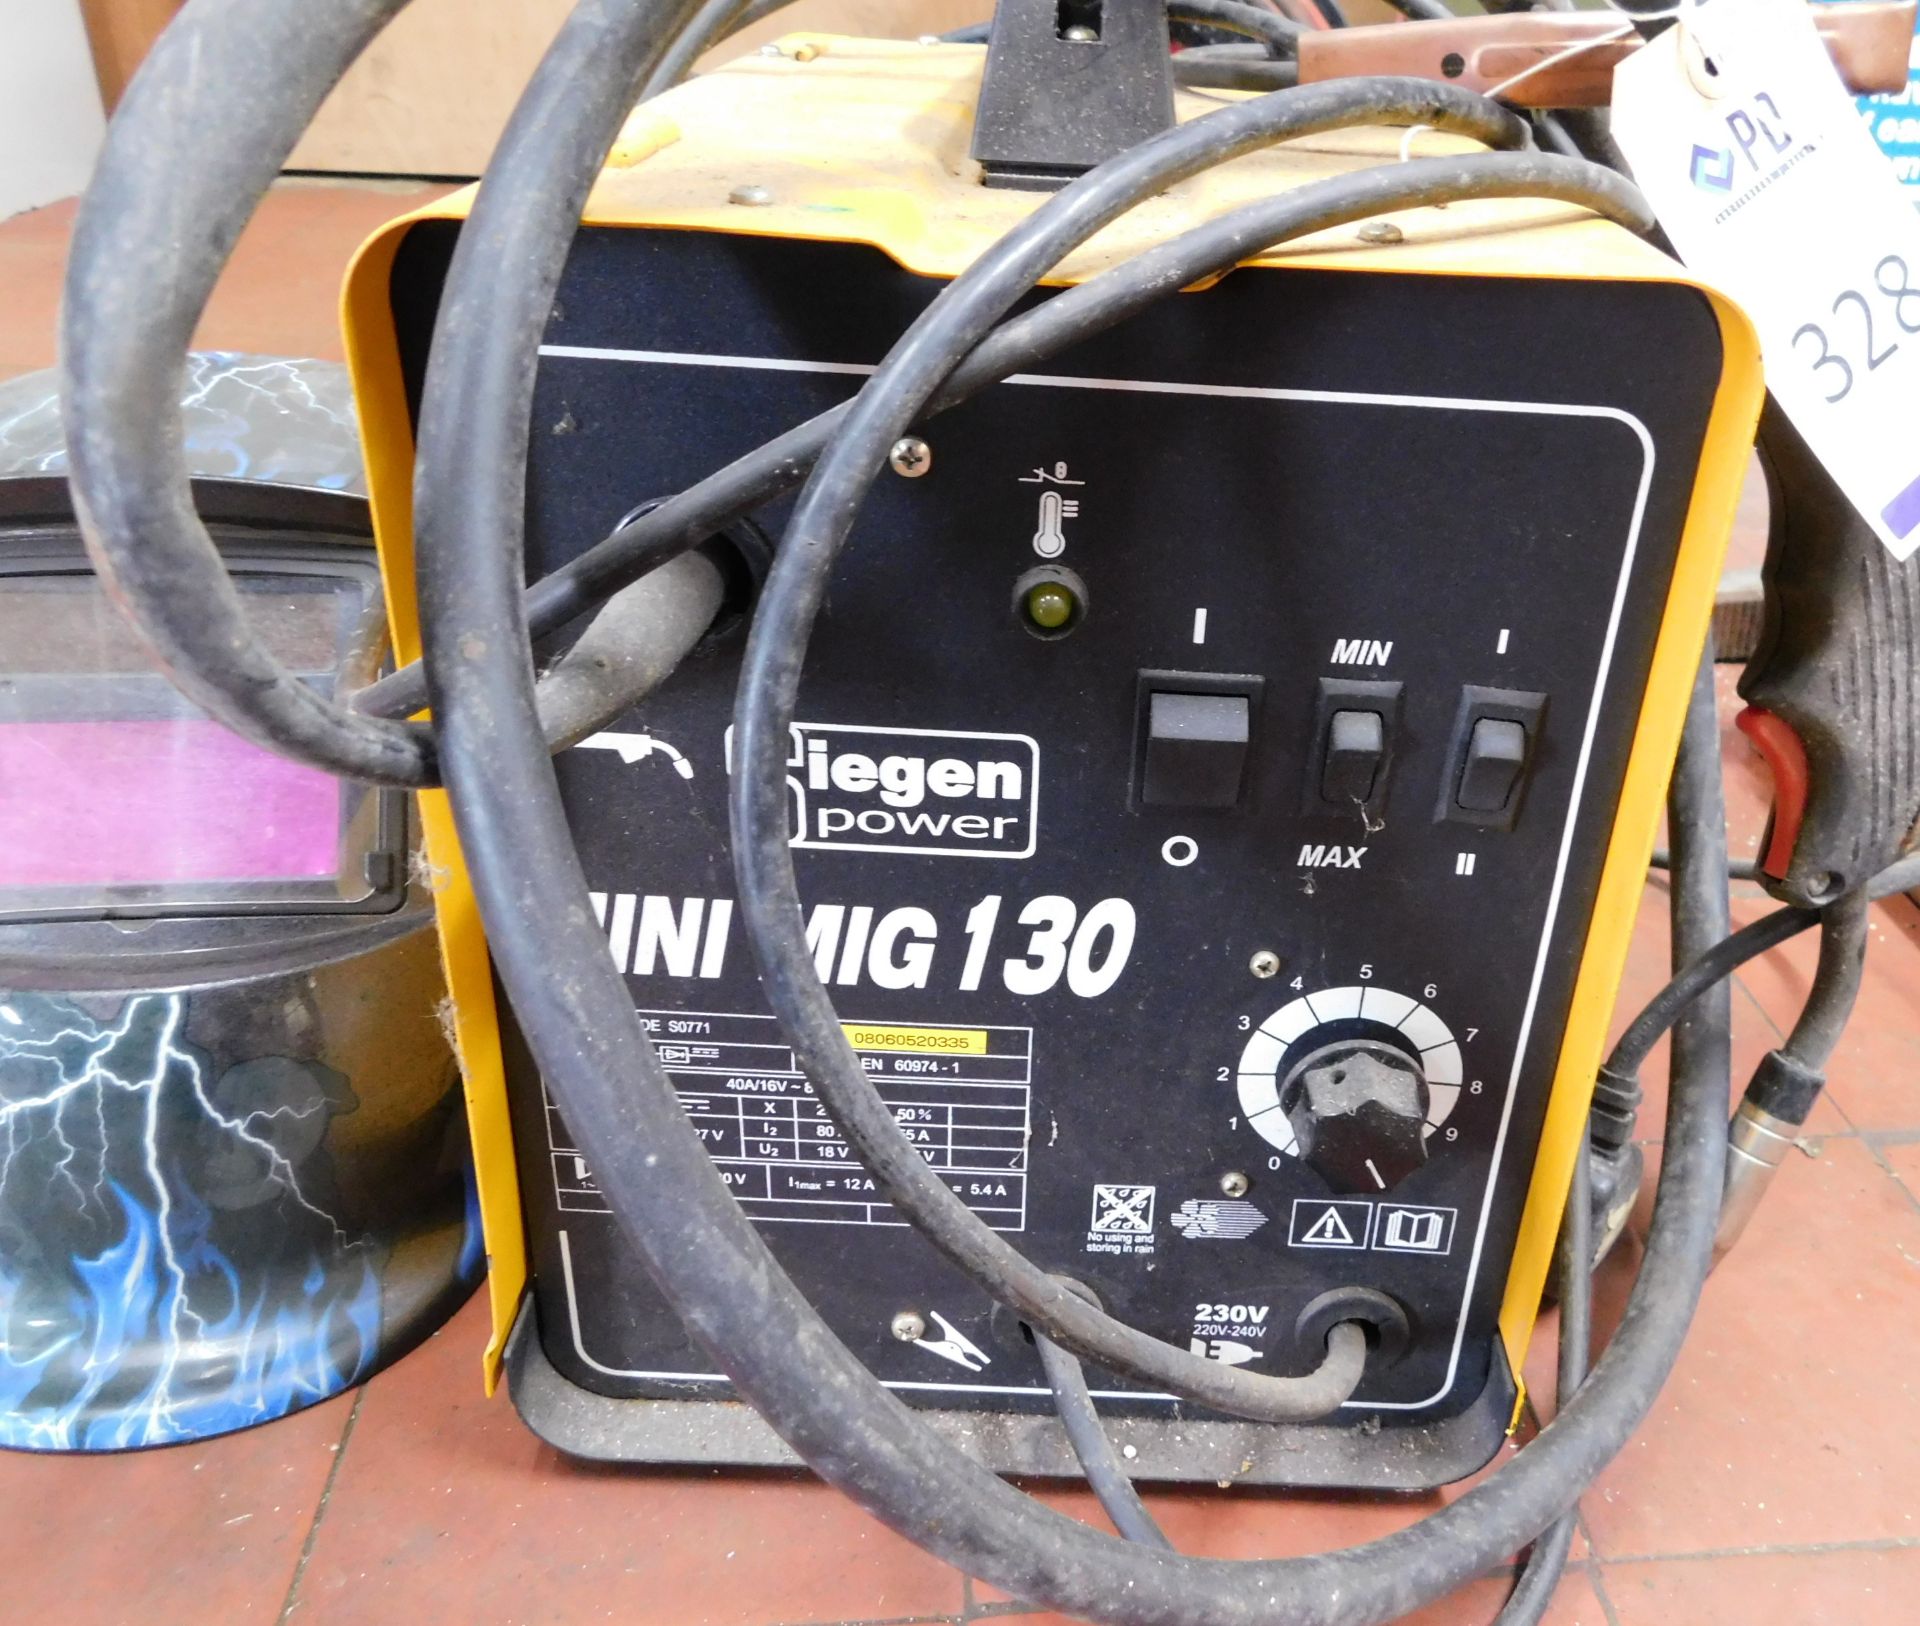 Siegen Power Mini Mig 130 Welder & Welding Mask (Location: Bolton. Please Refer to General Notes) - Image 4 of 4